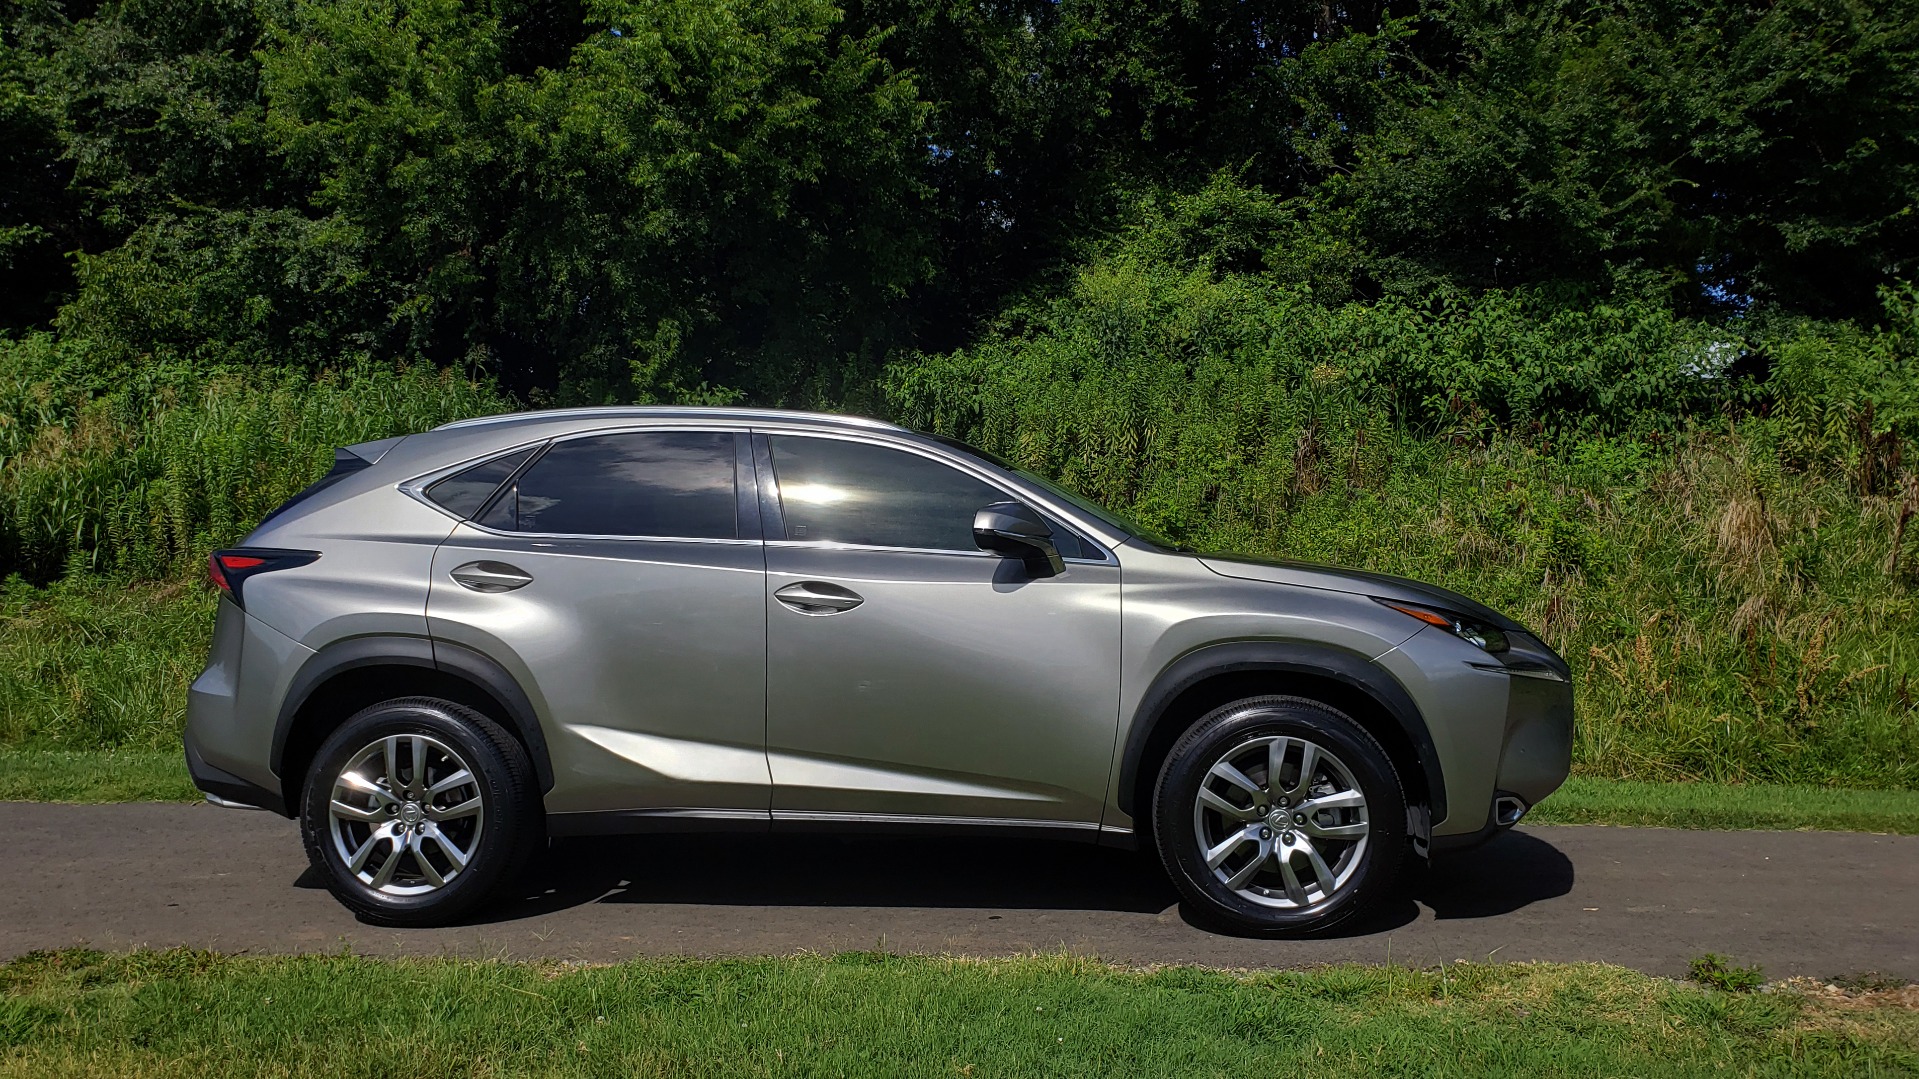 Used 2016 Lexus NX 200T FWD / PREMIUM PKG / SUNROOF / BSM / REARVIEW for sale Sold at Formula Imports in Charlotte NC 28227 5